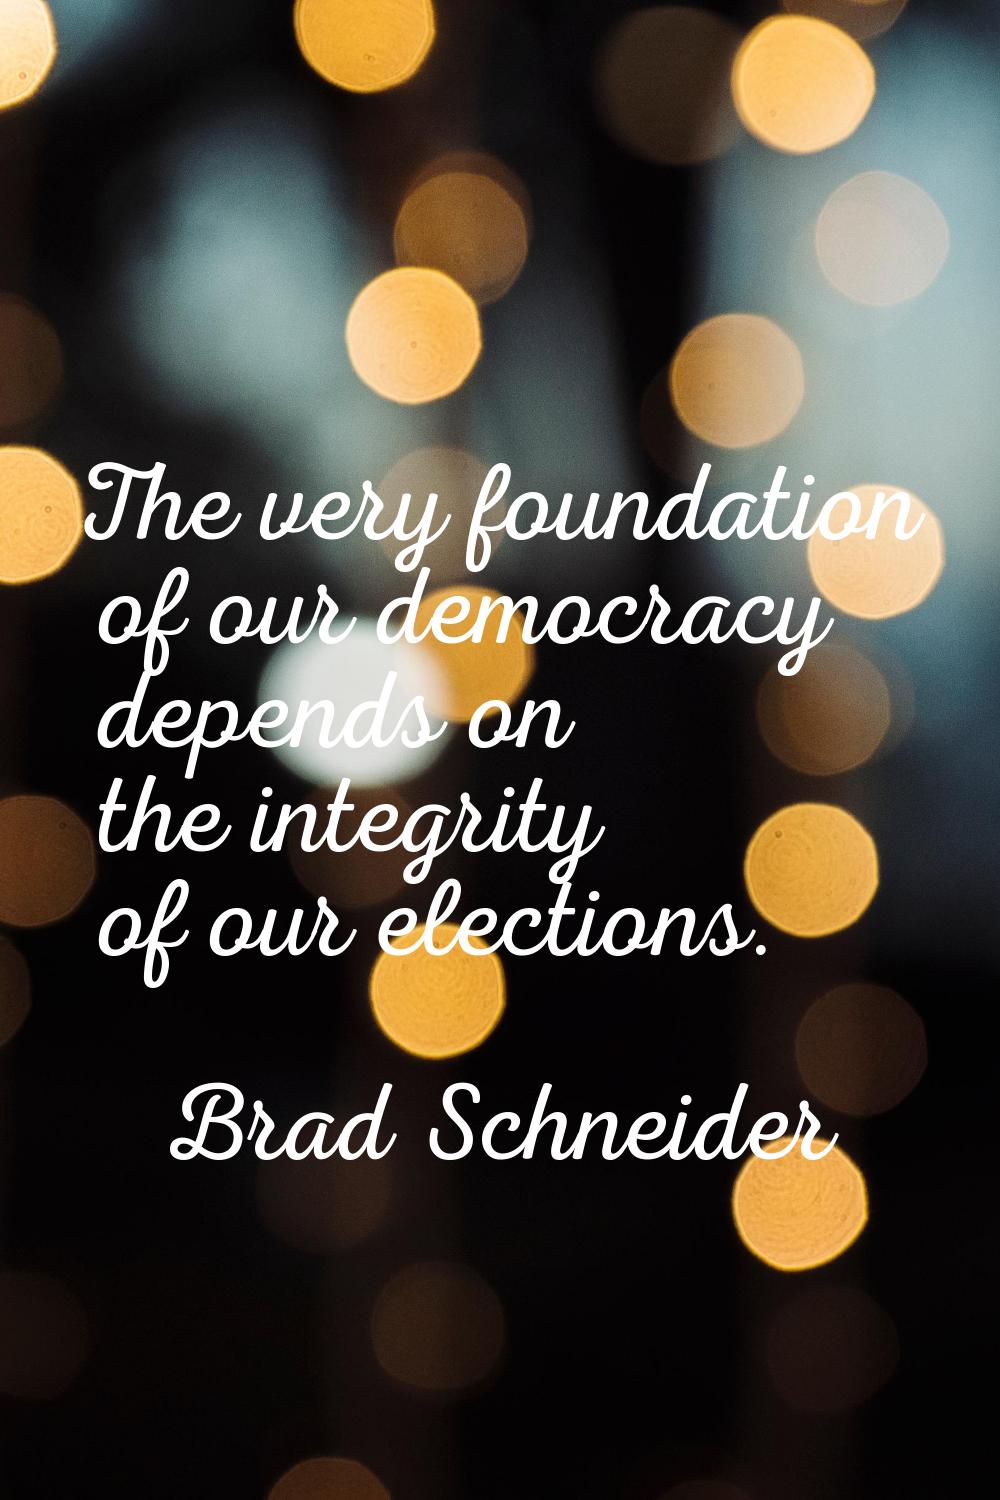 The very foundation of our democracy depends on the integrity of our elections.